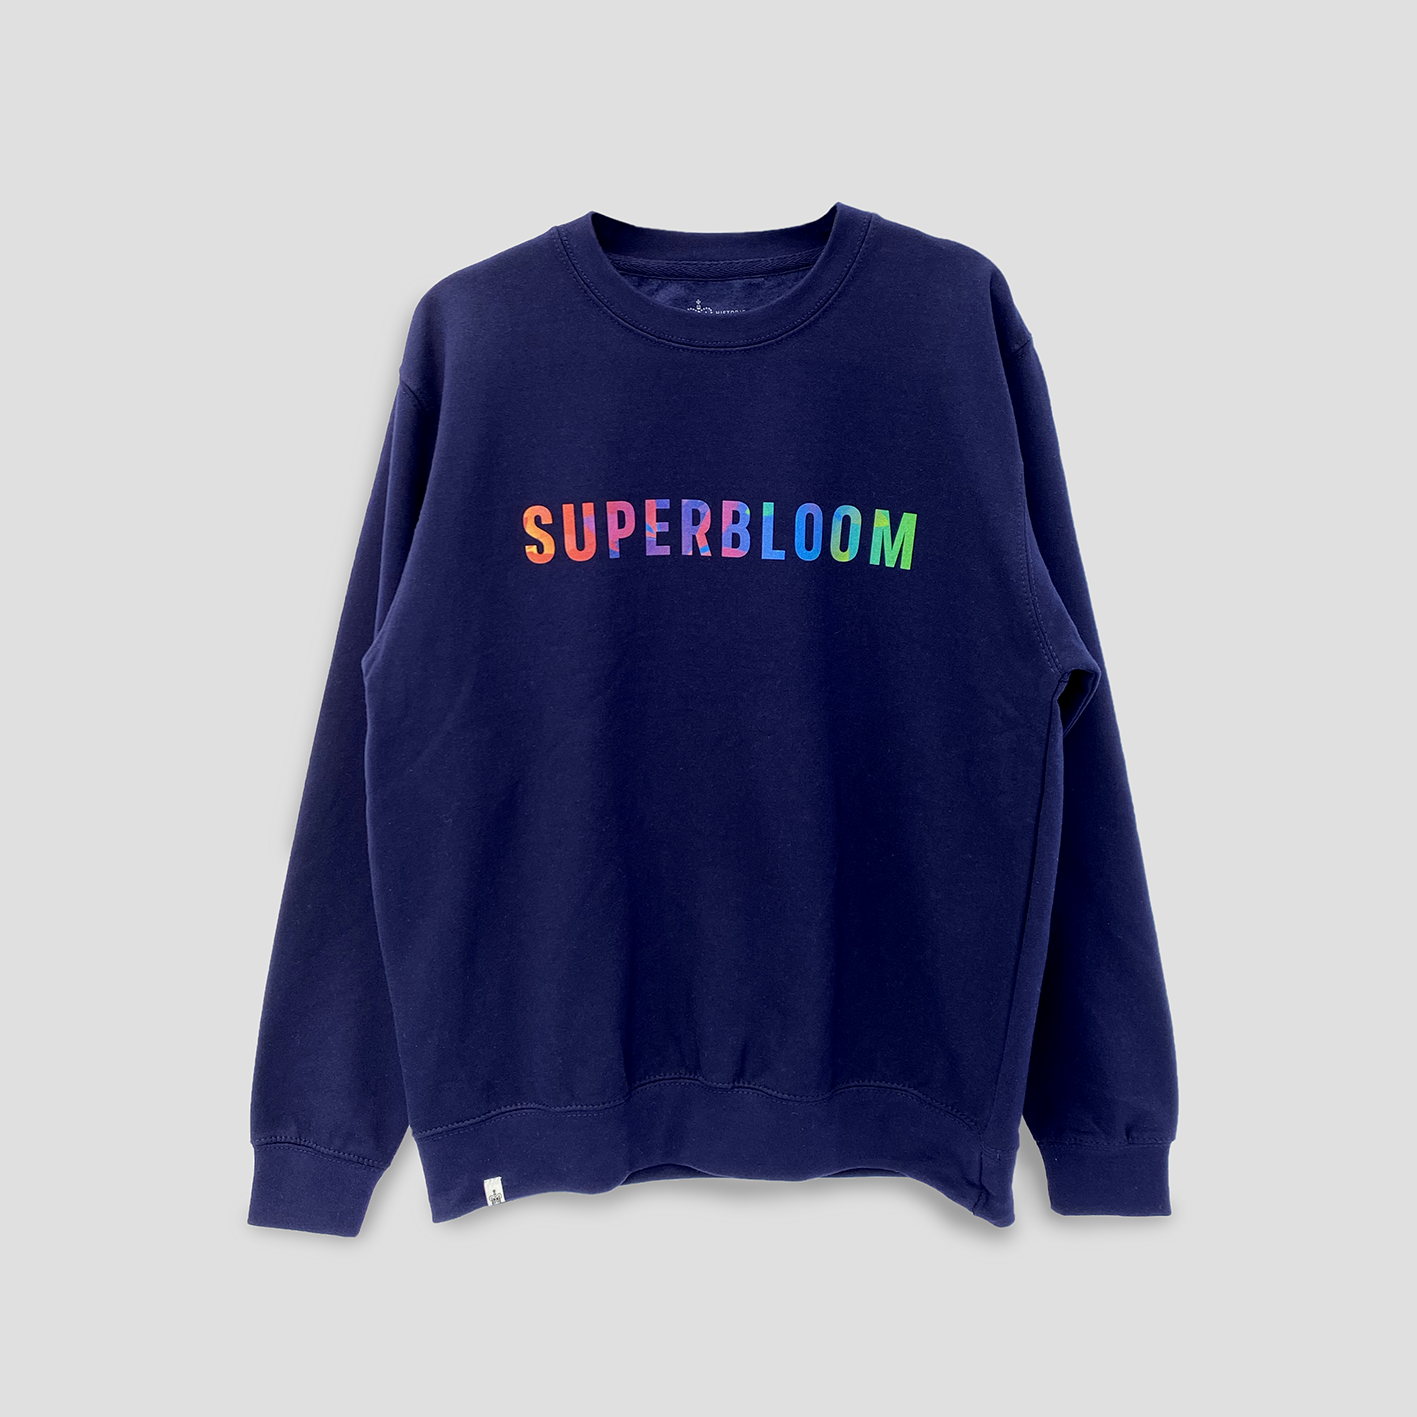 2 DTG Apparel and clothing on a Navy Sweatshirt for the Super bloom at the tower on london